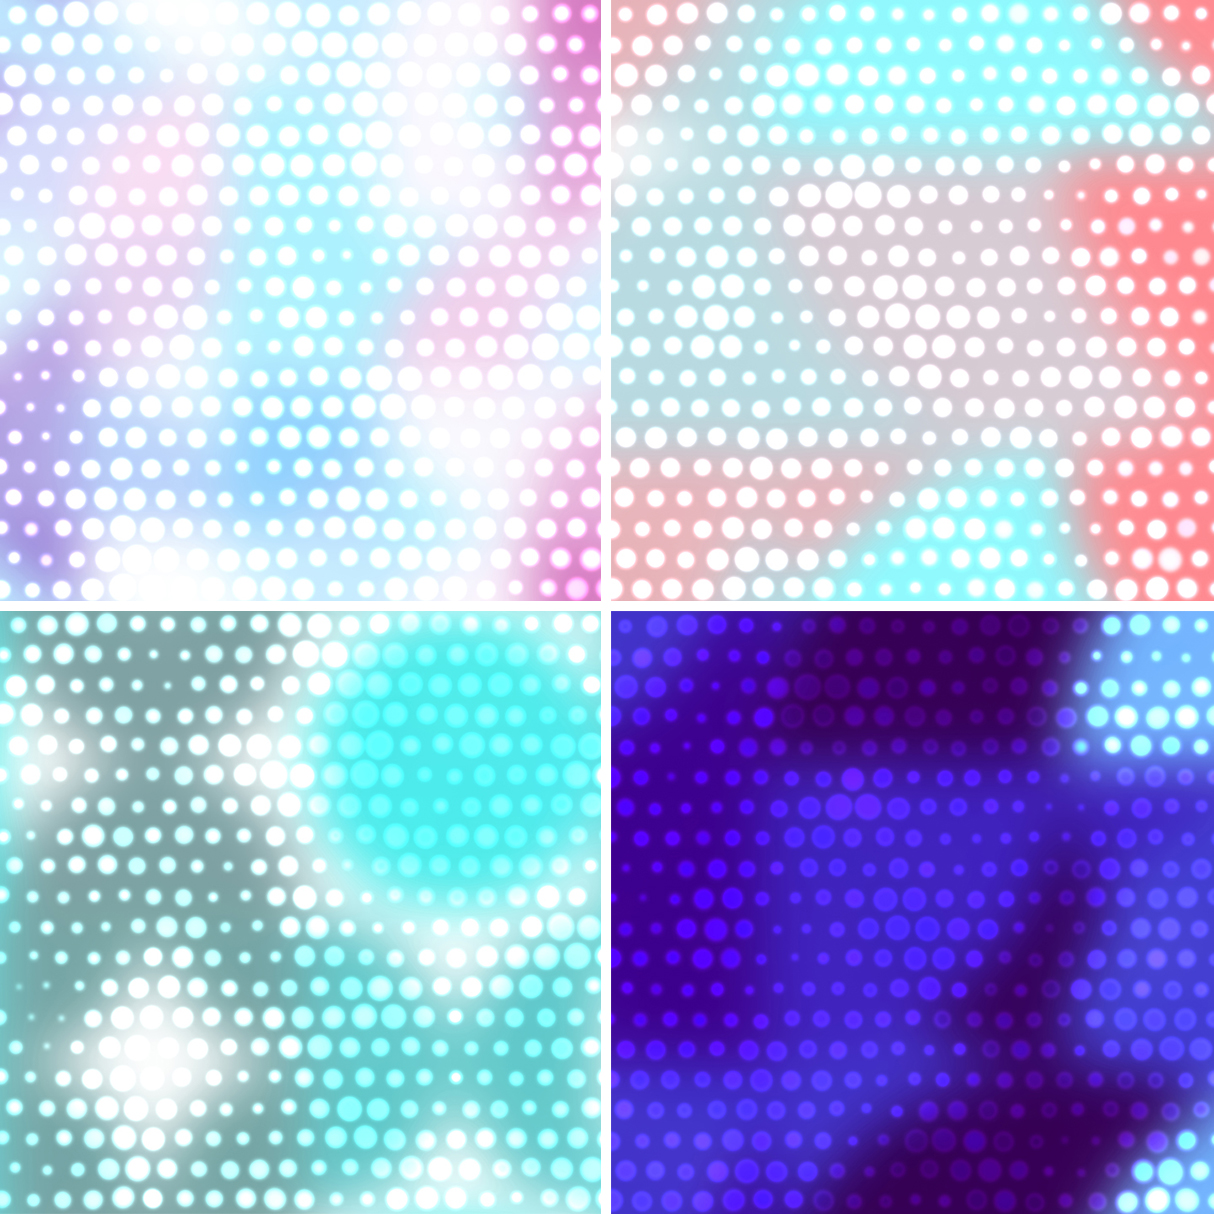 50 Shining Dotty Backgrounds Samples Preview – Part 1